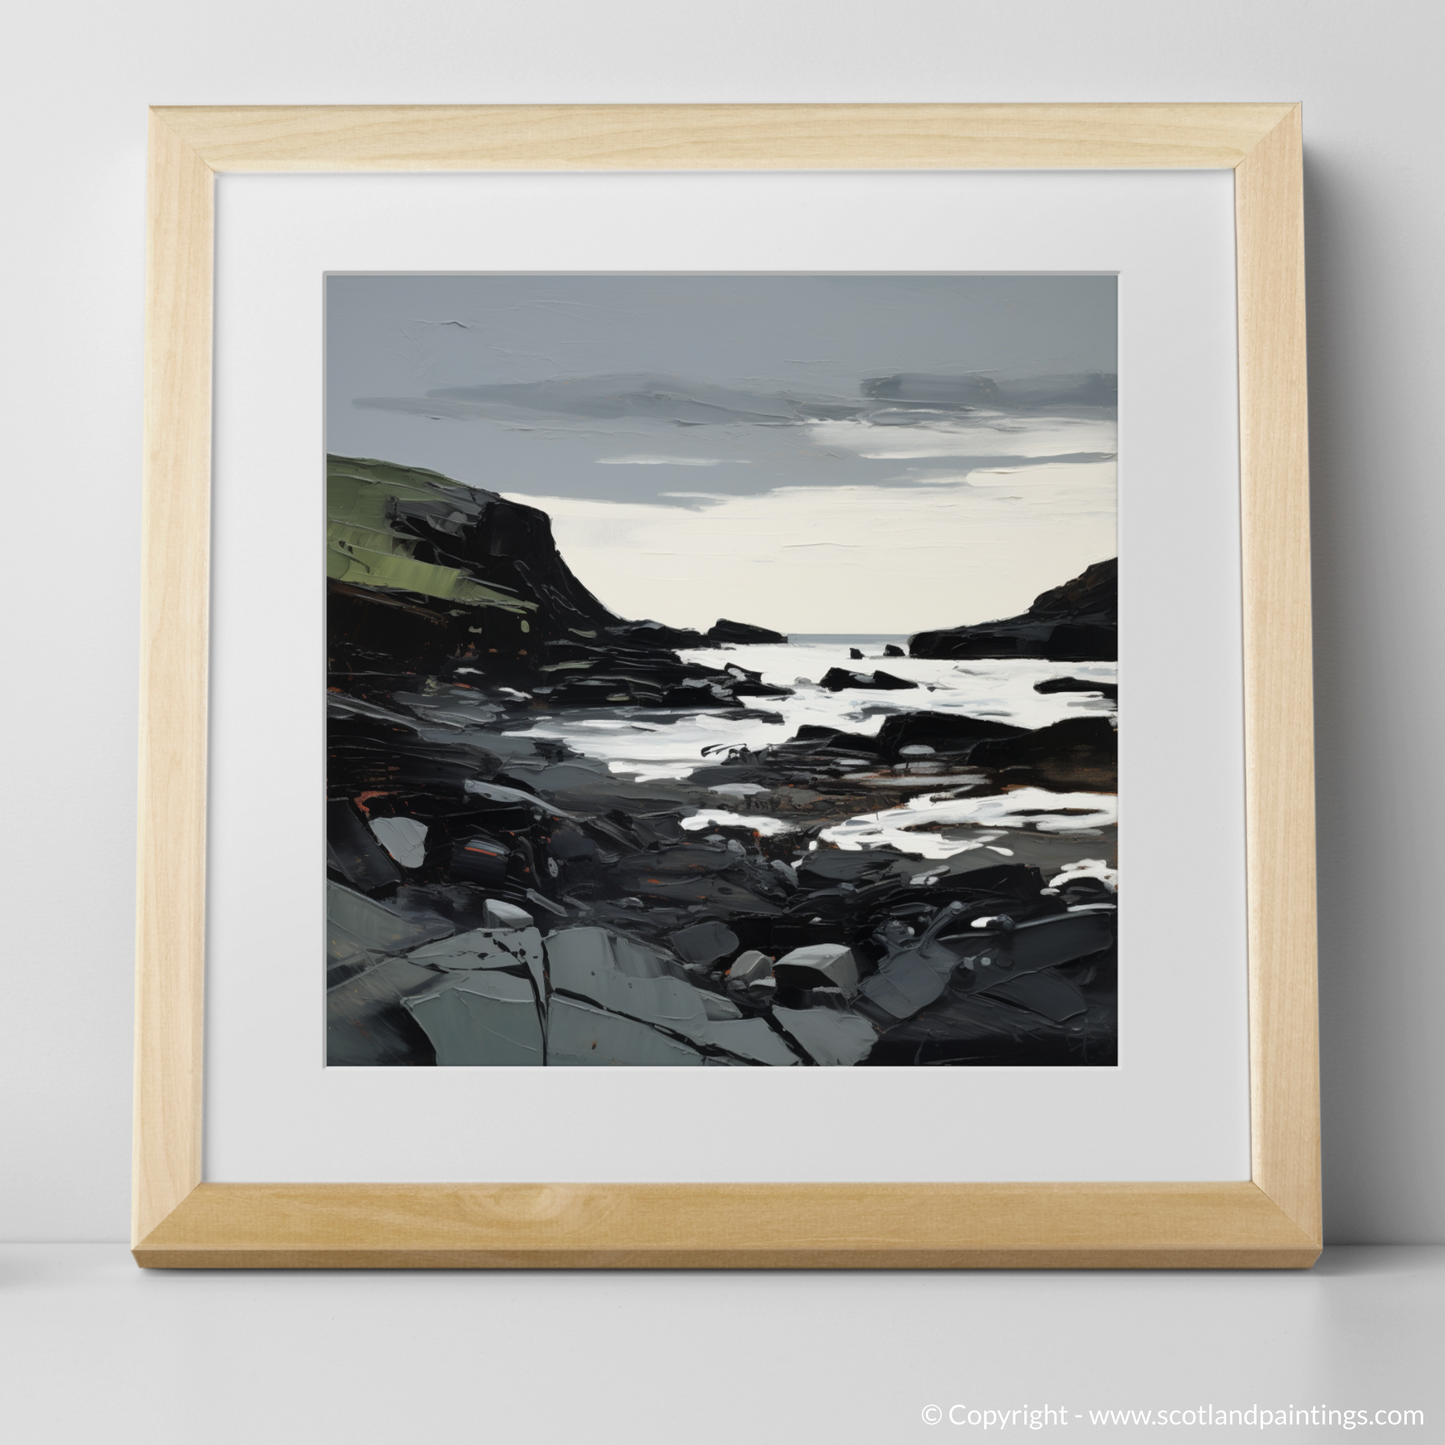 Art Print of Catterline Bay, Aberdeenshire with a natural frame